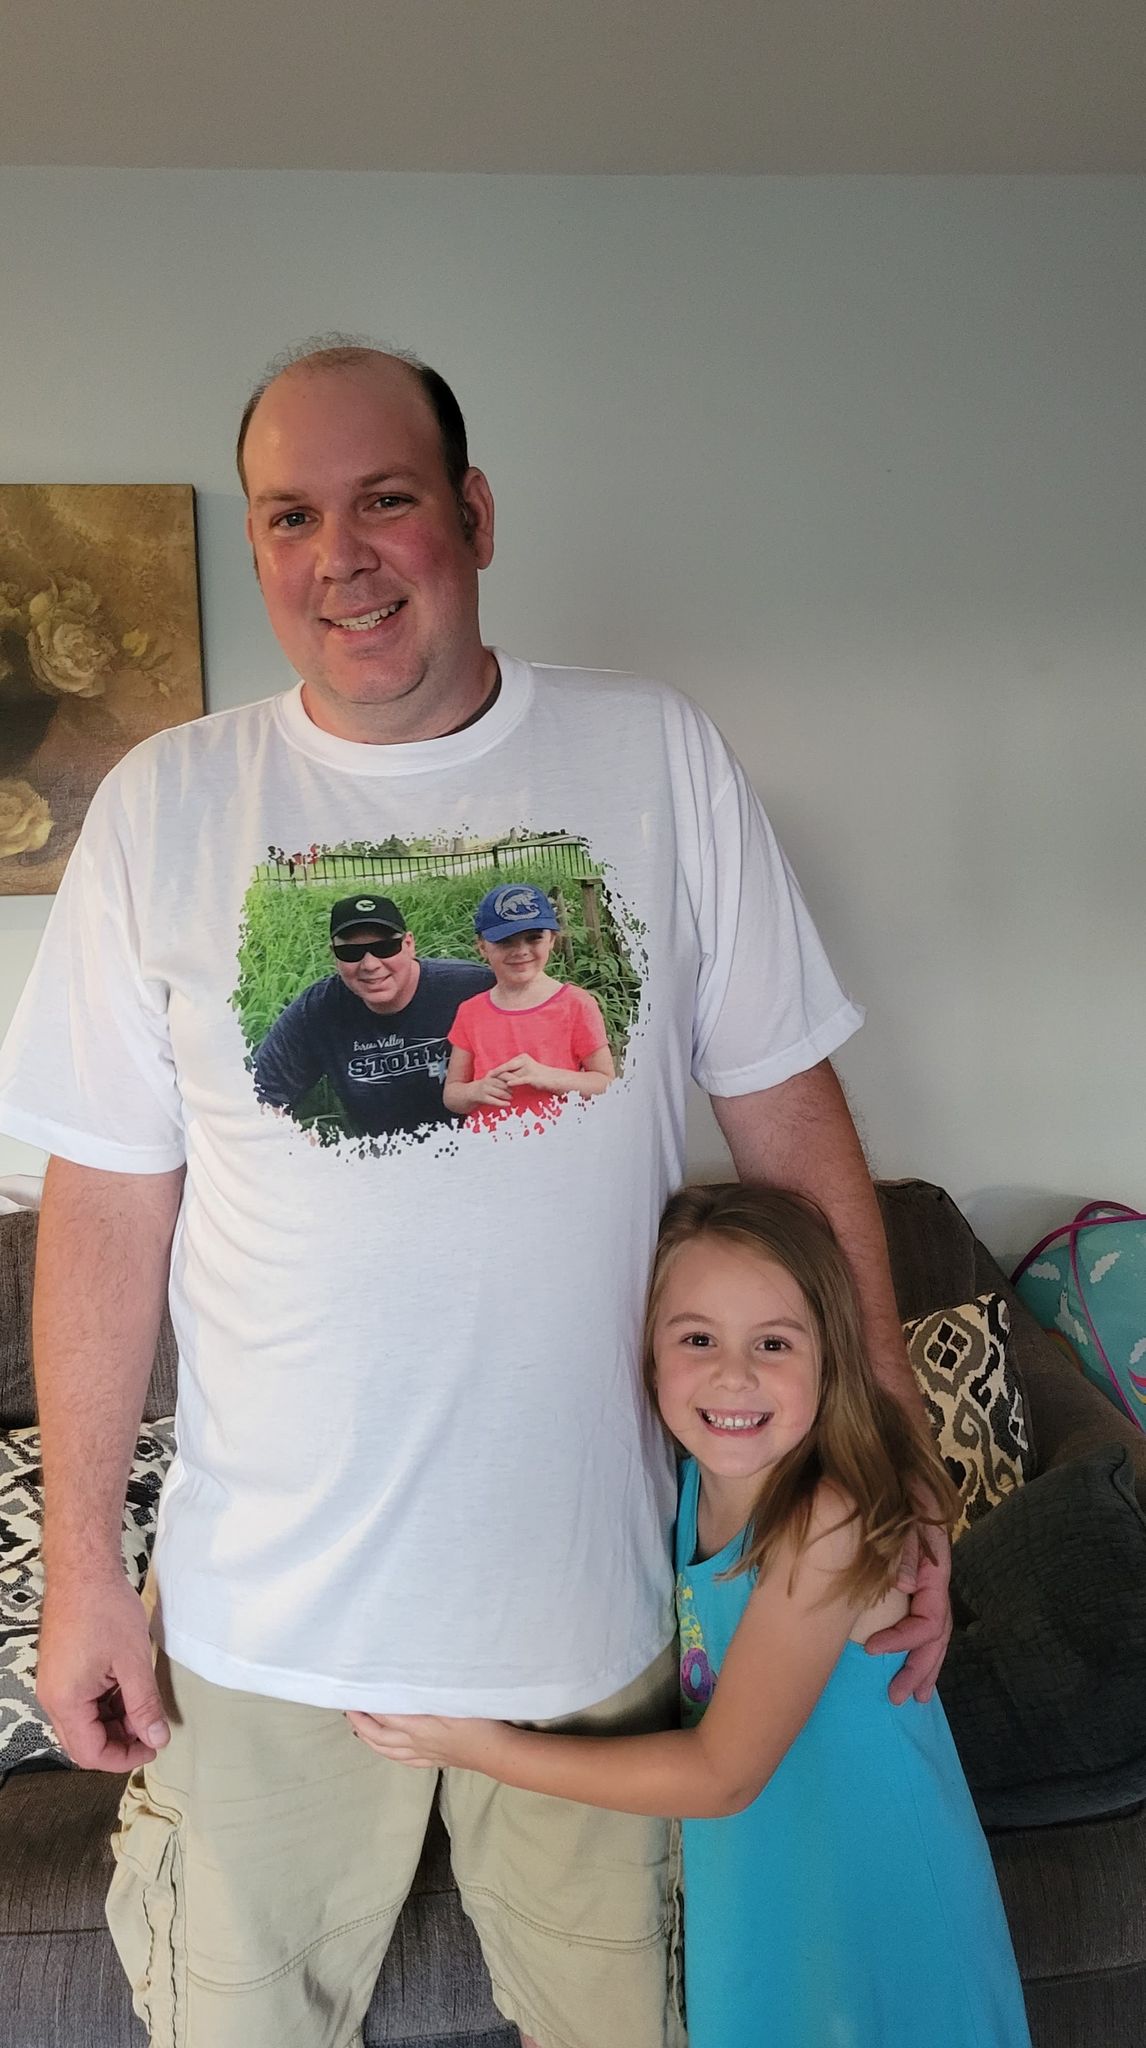 This is a father and daughter shirt order I made for a Father's Day gift.   The mother messaged